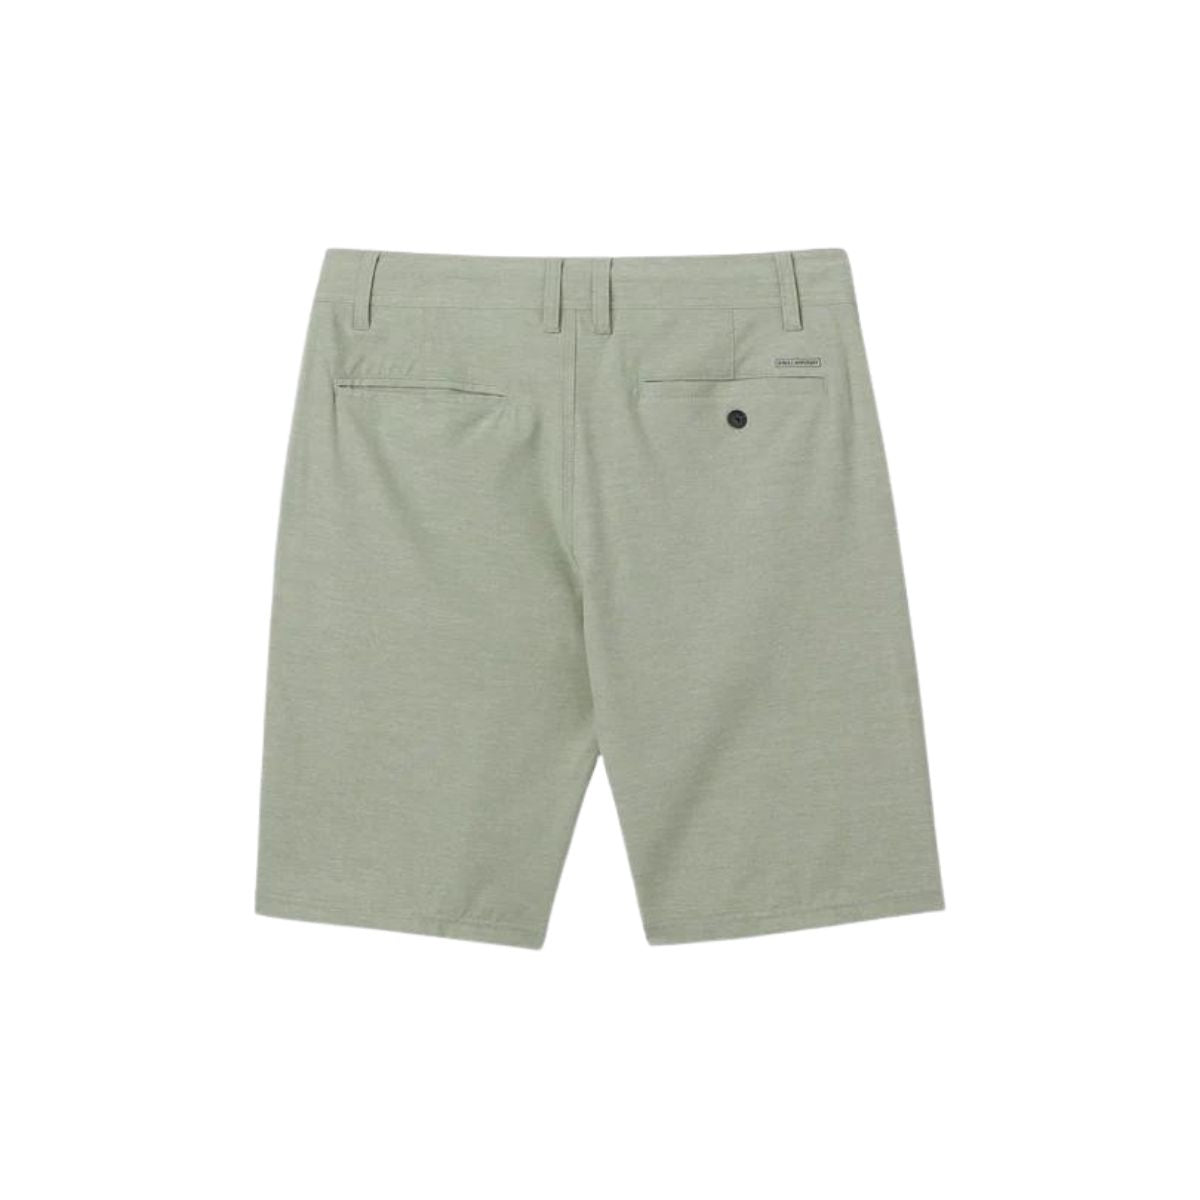 O'Neill Reserve Light Check 21" Hybrid Shorts in Sage - BoardCo